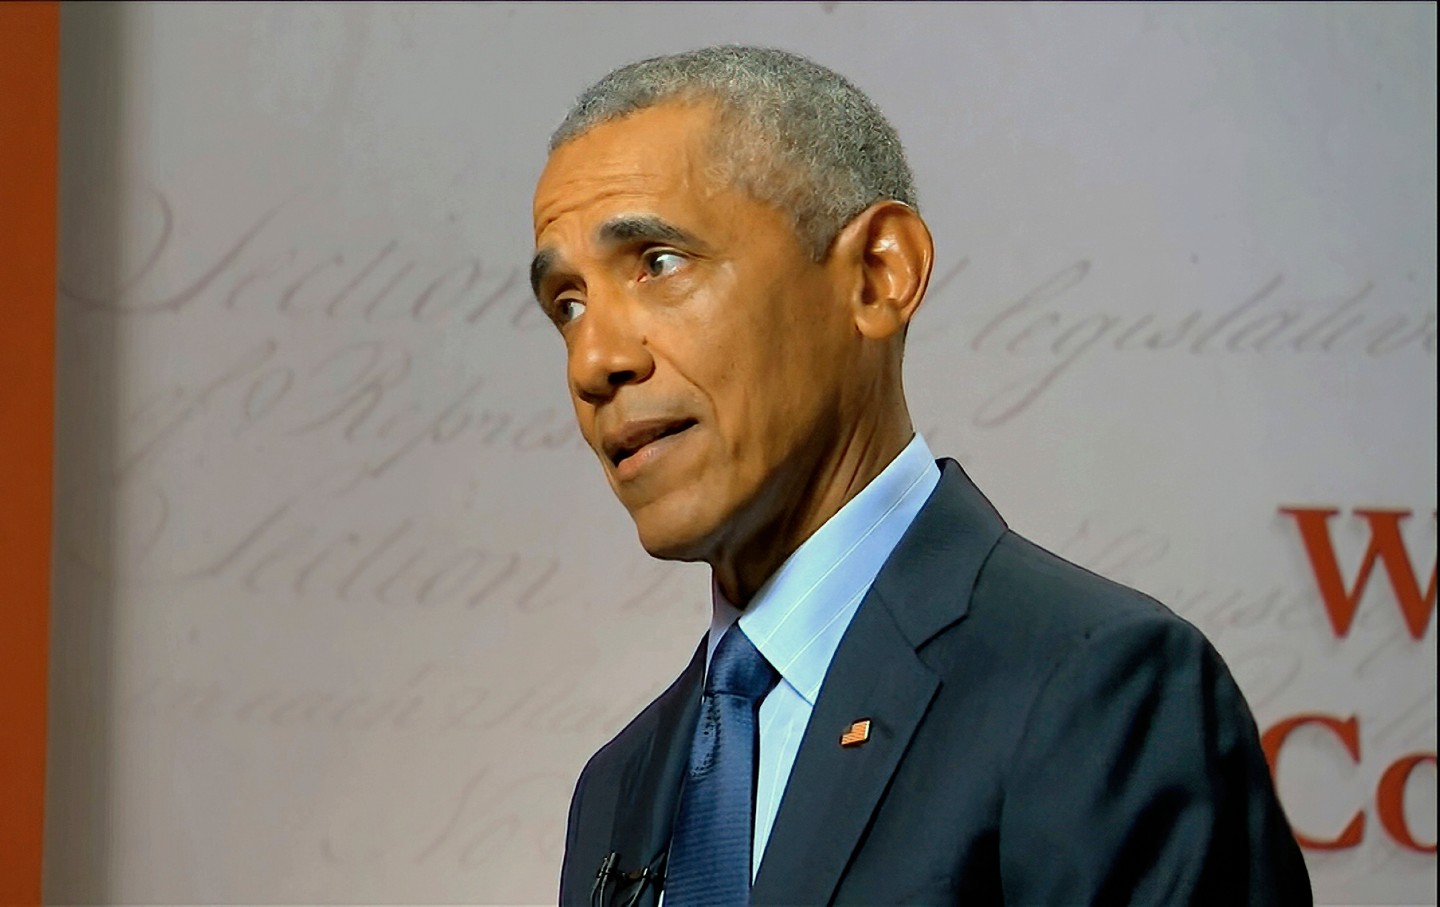 Obama’s High-Minded Civics Lesson Asks Too Much of Us